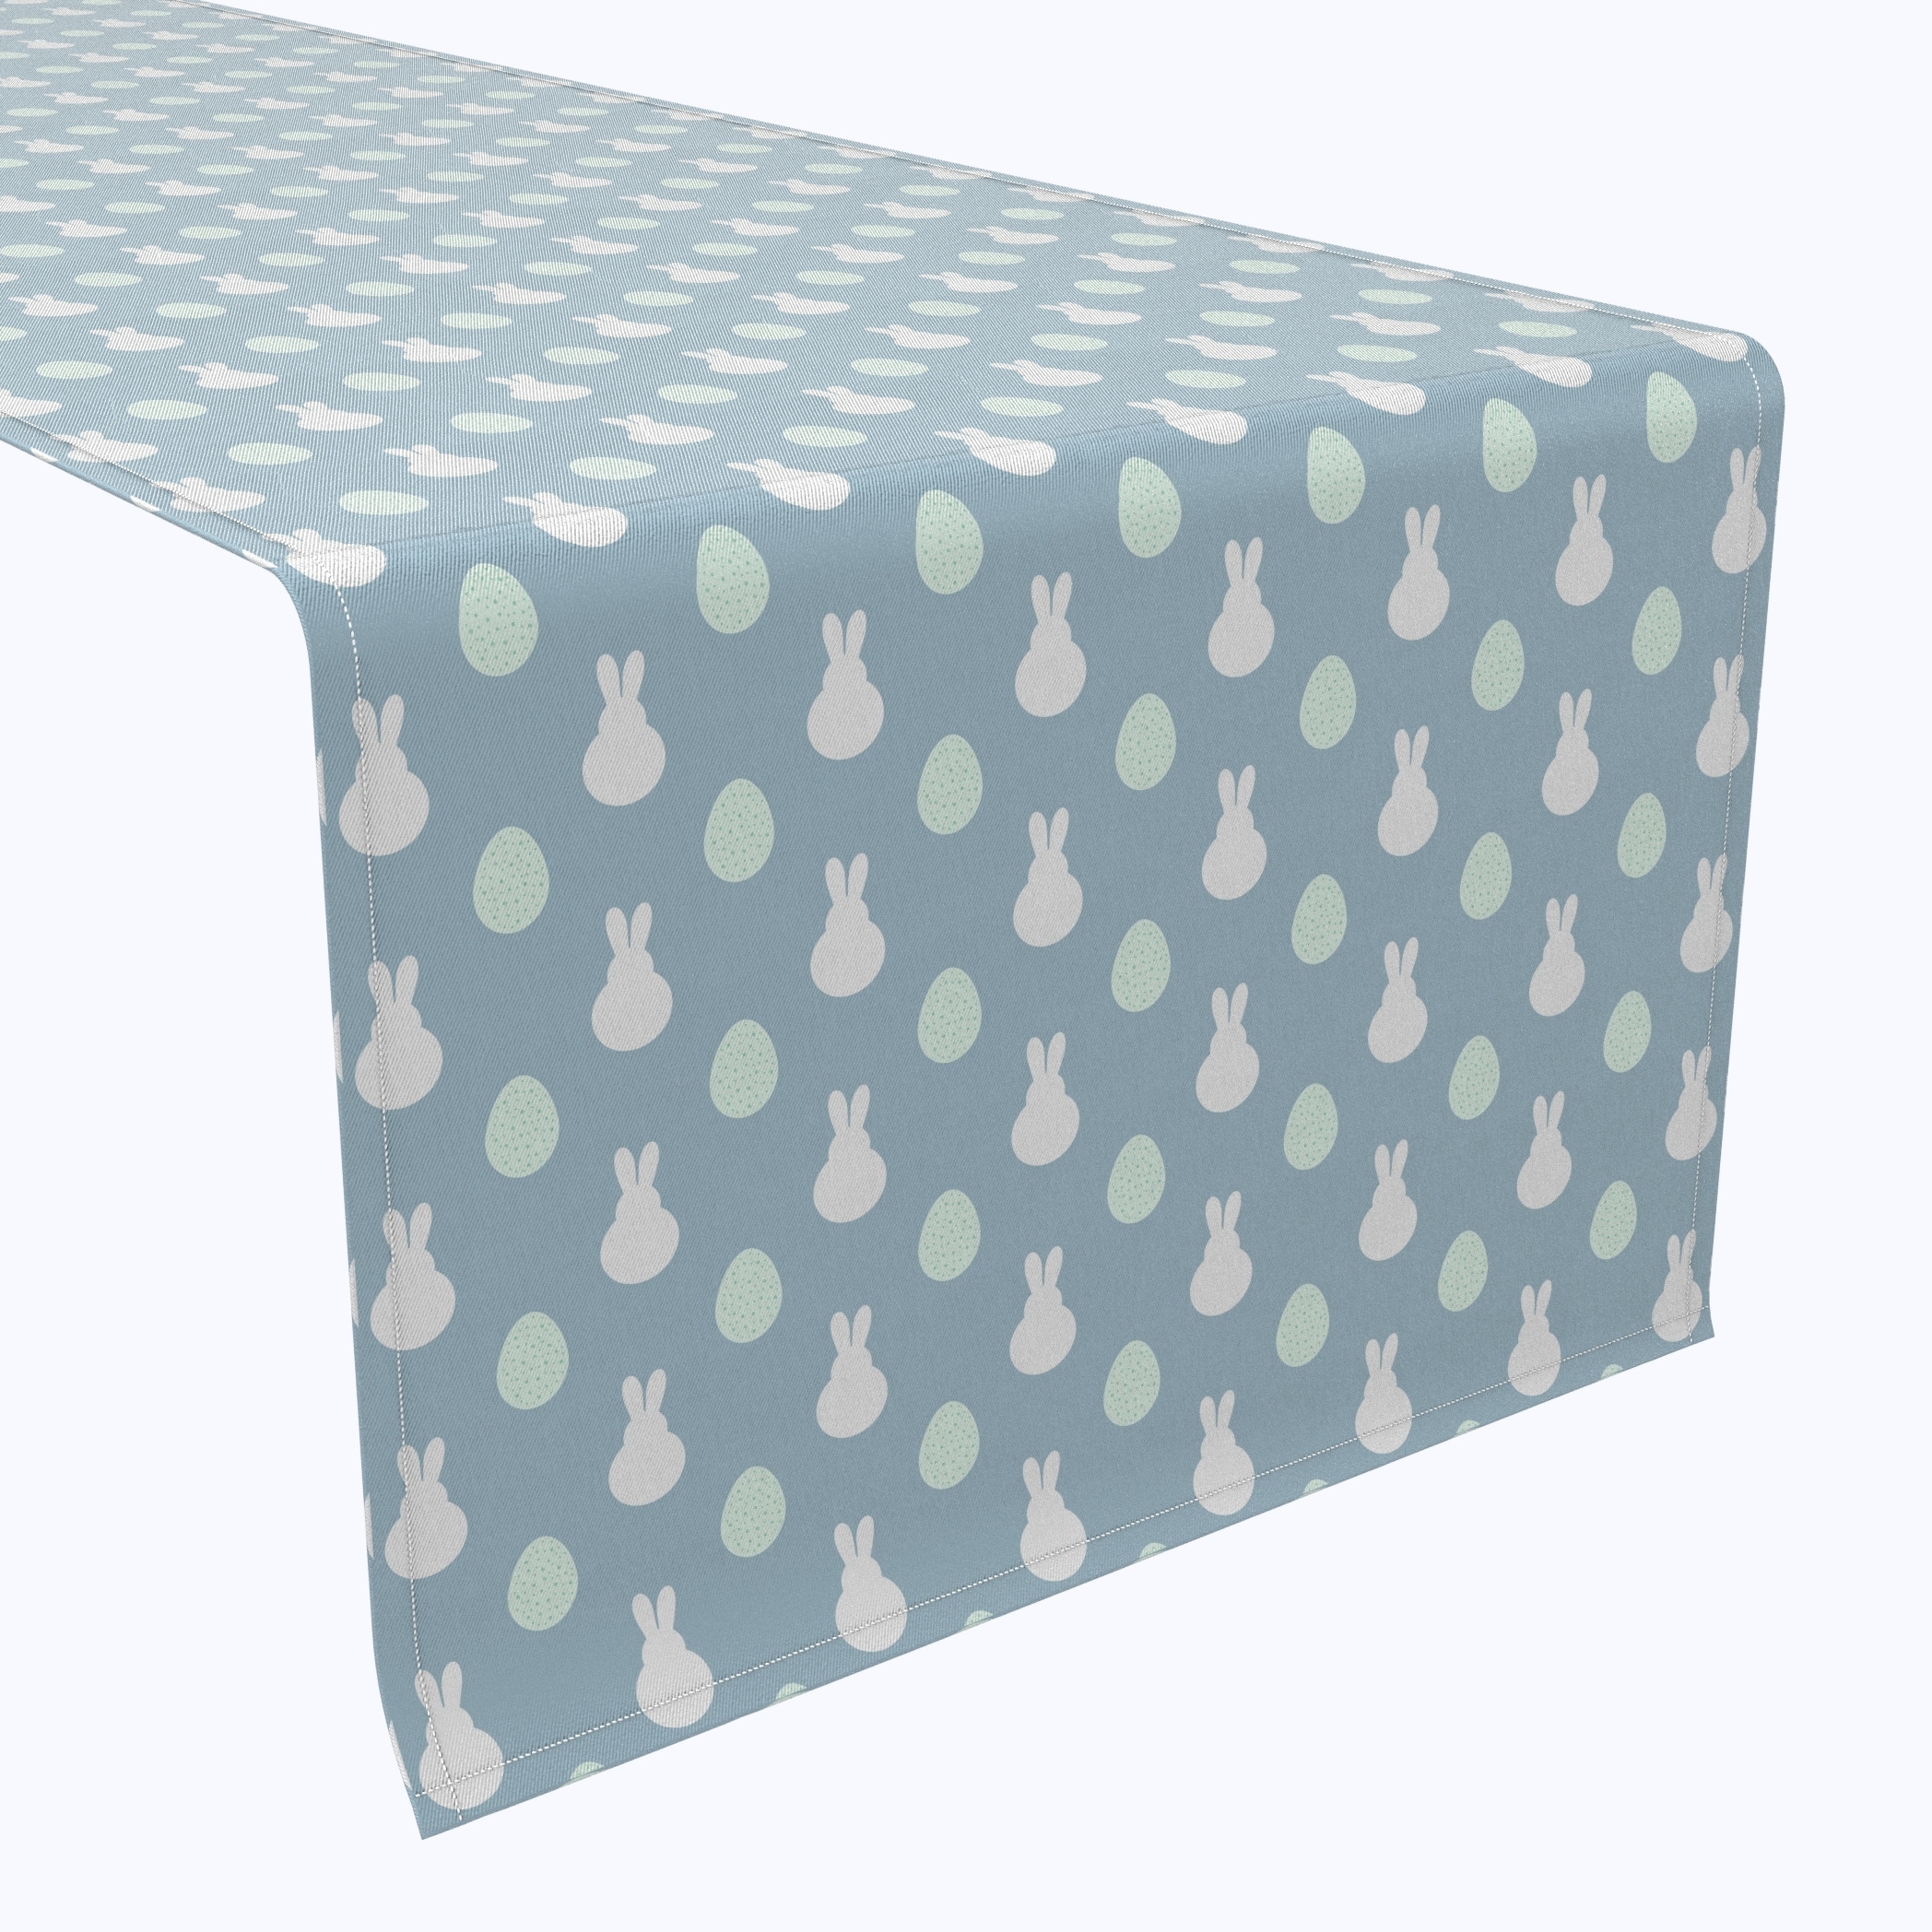 Fabric Textile Products, Inc. Table Runner, 100% Cotton, 16x108", Blue Patterned Bunnies & Eggs